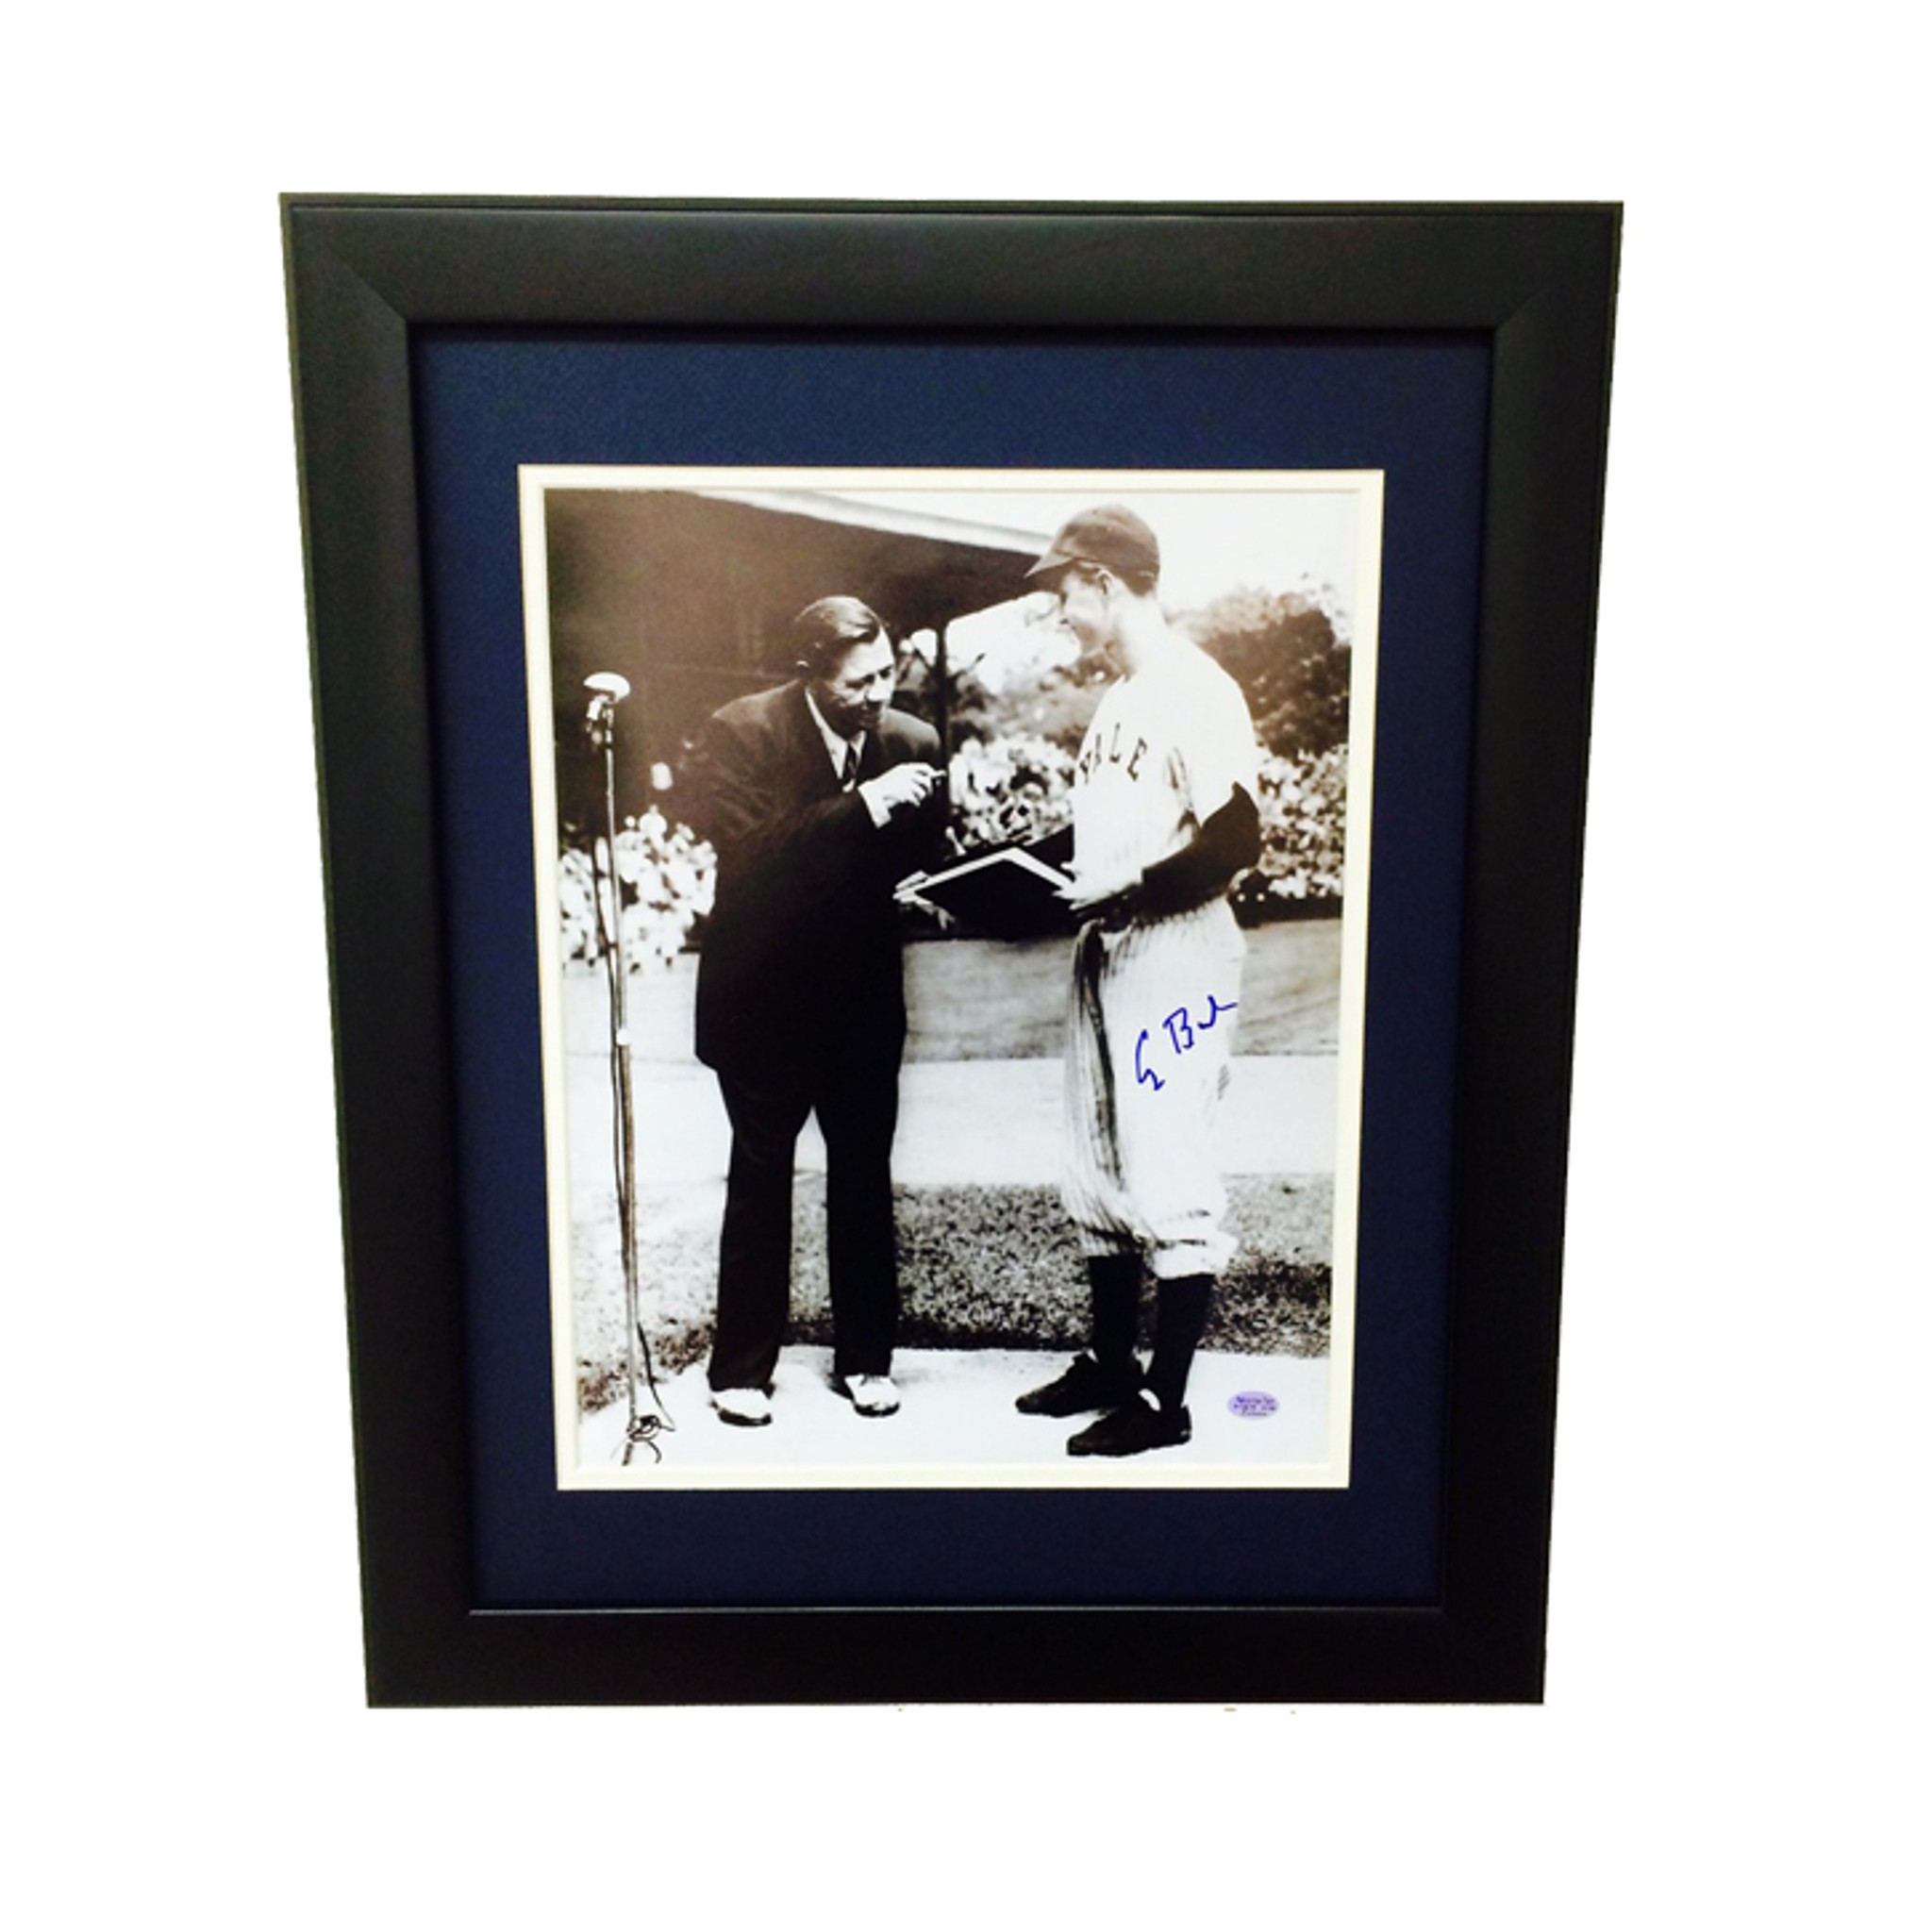 Framed pictures are a great addition to any collection! Frame your 8x10, 11x14, 16x20, 18x24 or 24x36 sports images with or without nameplates!